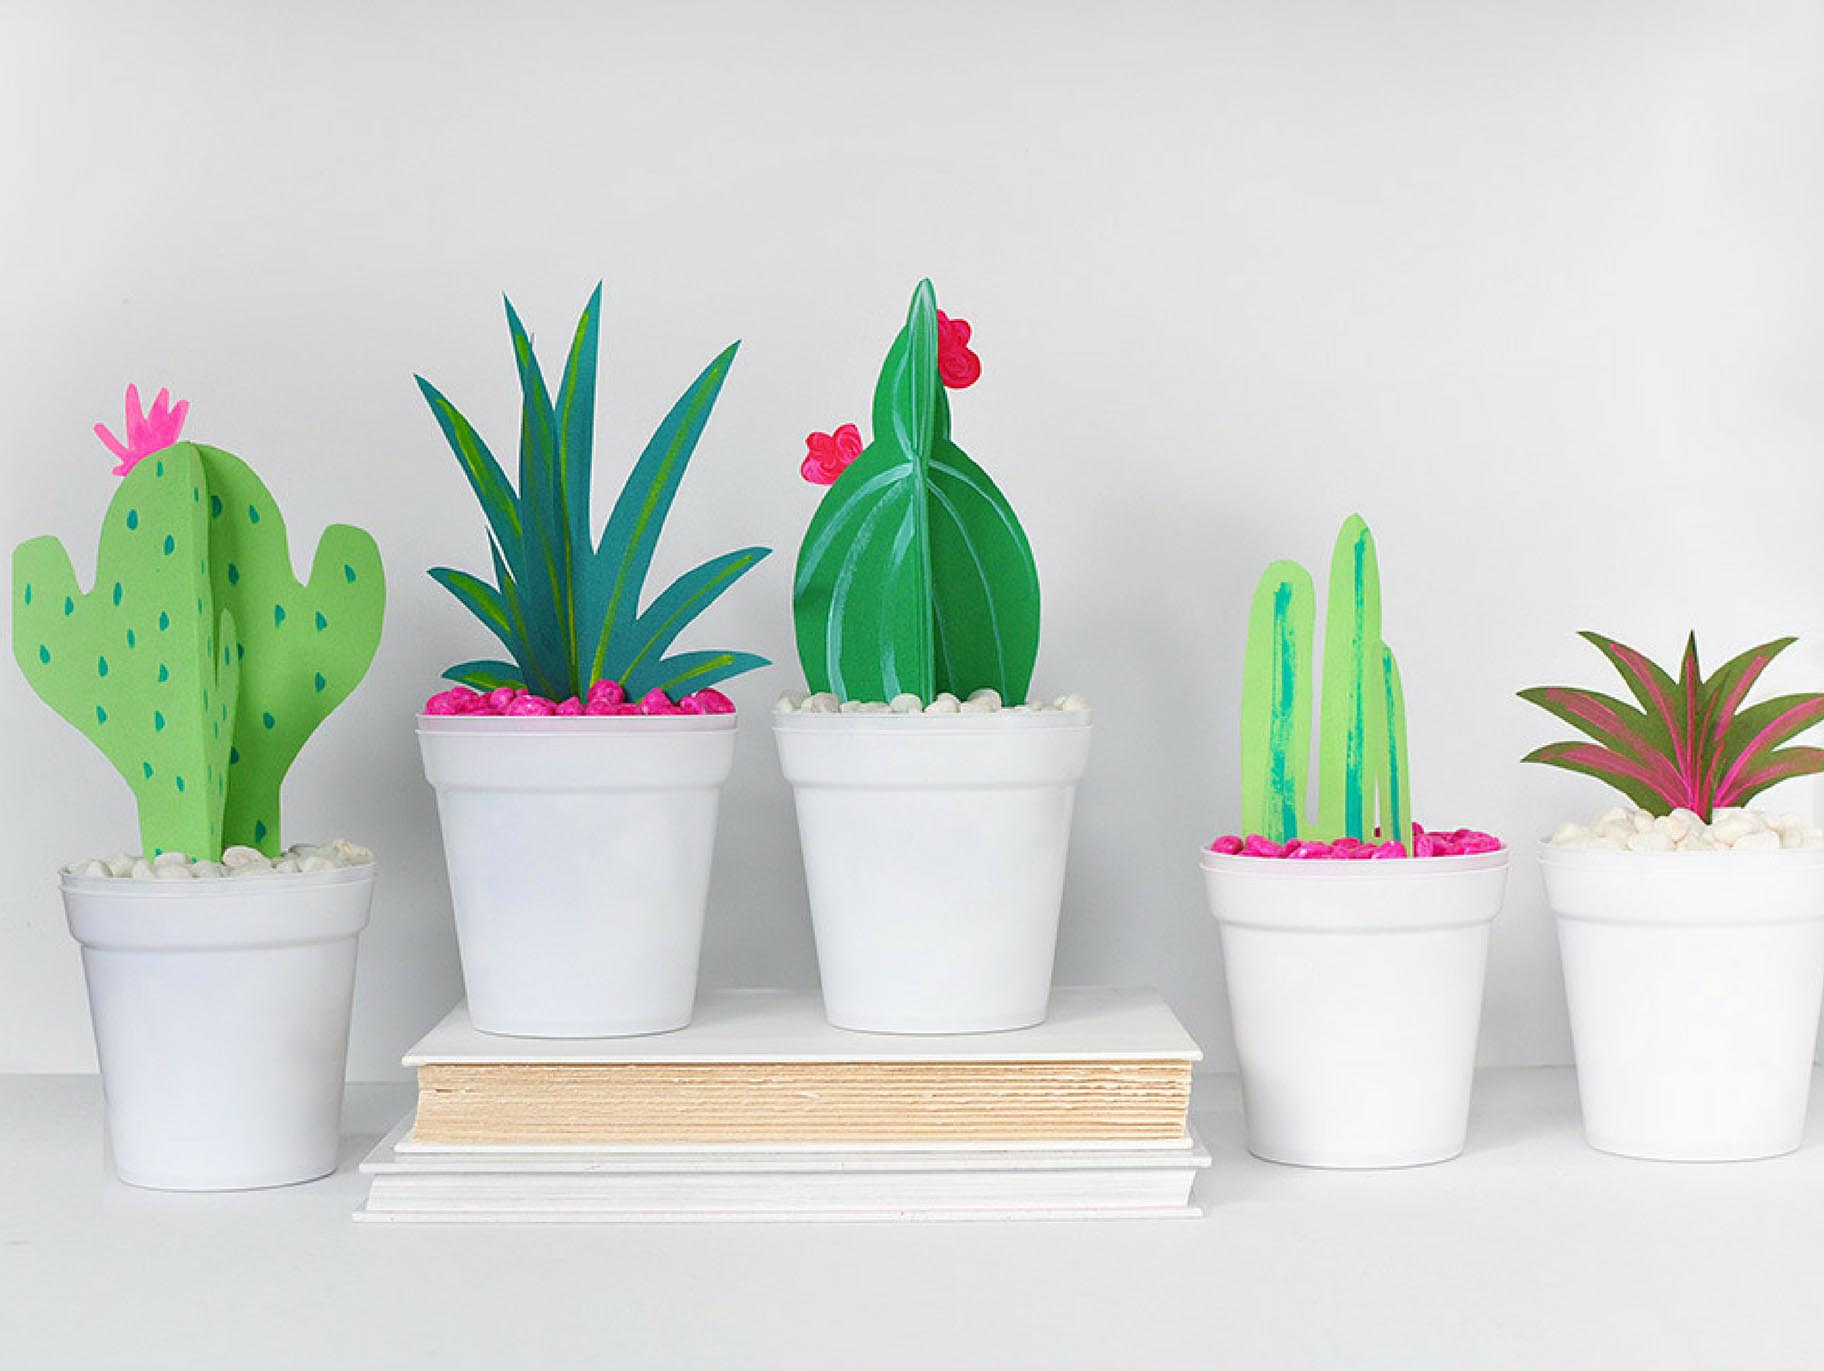 How To Make Paper Cactus Flower / New segments of the paper spine .